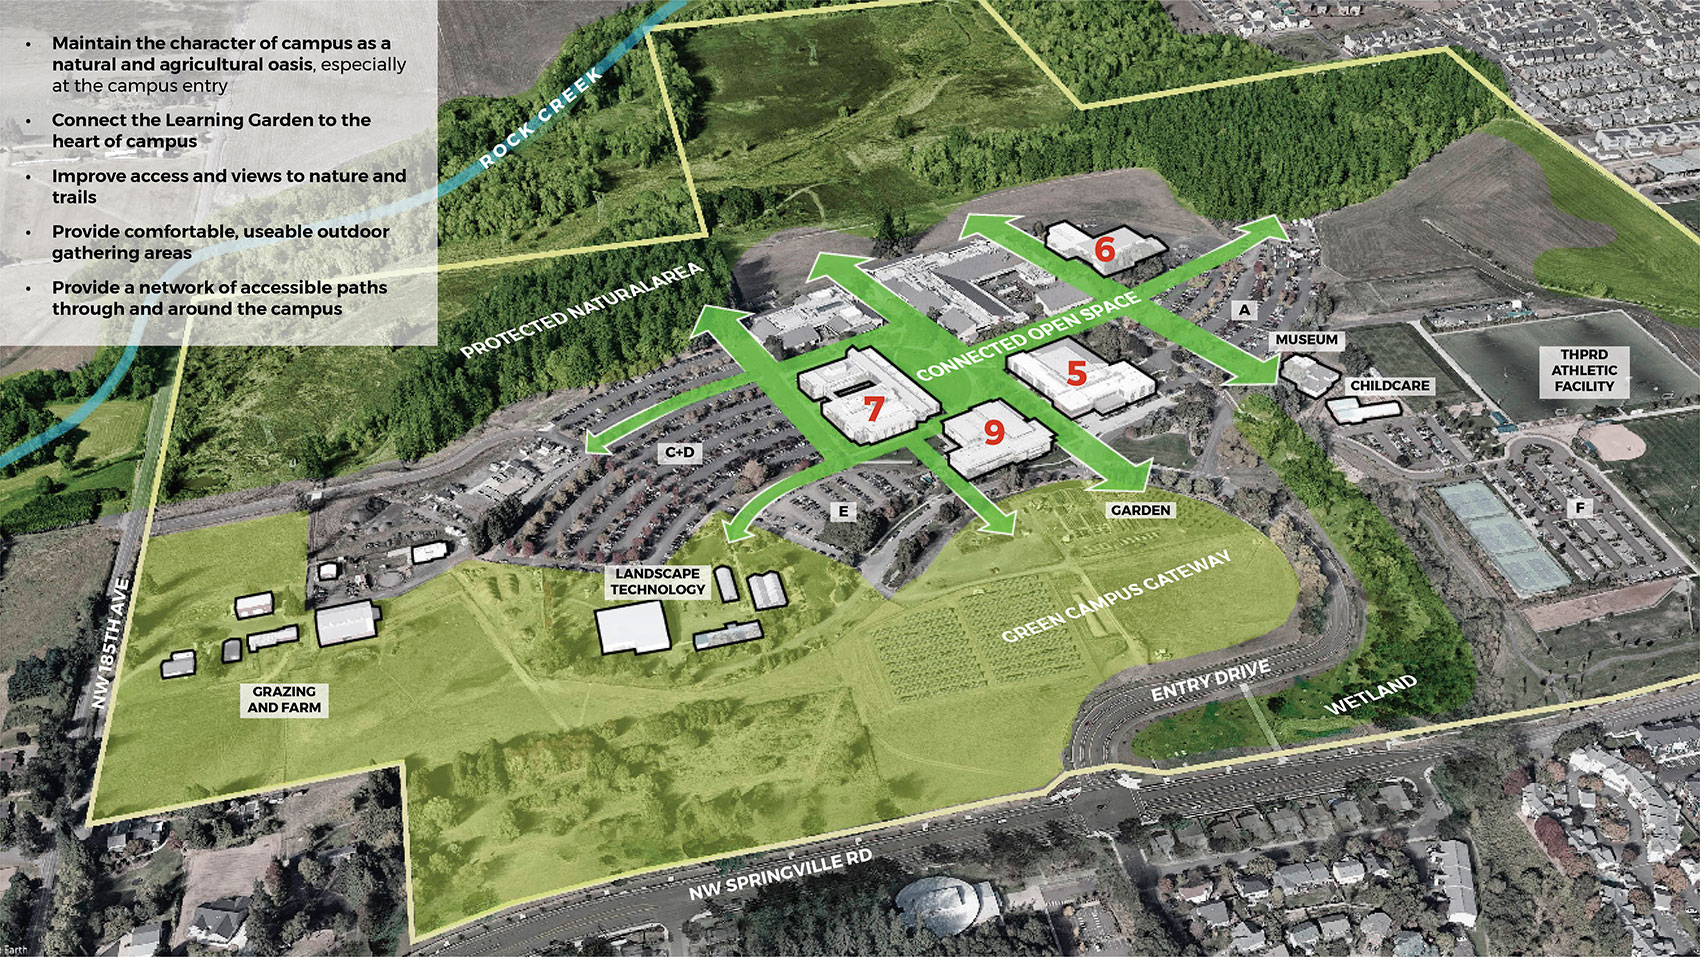 Concept Graphic|The same aerial photograph view as shown in the Existing Campus image, but slightly faded to black and white. A bright green color fills and connects the important outdoor areas in the center of campus, and extends in arrows between buildings toward the forest, fields, and learning garden. A dark green color is overlaid on the natural areas and extends along the eastern boundary of the campus, labeled “protected natural area”. A lighter green covers the fields and farm at the south and west of campus, labeled “green campus gateway”.